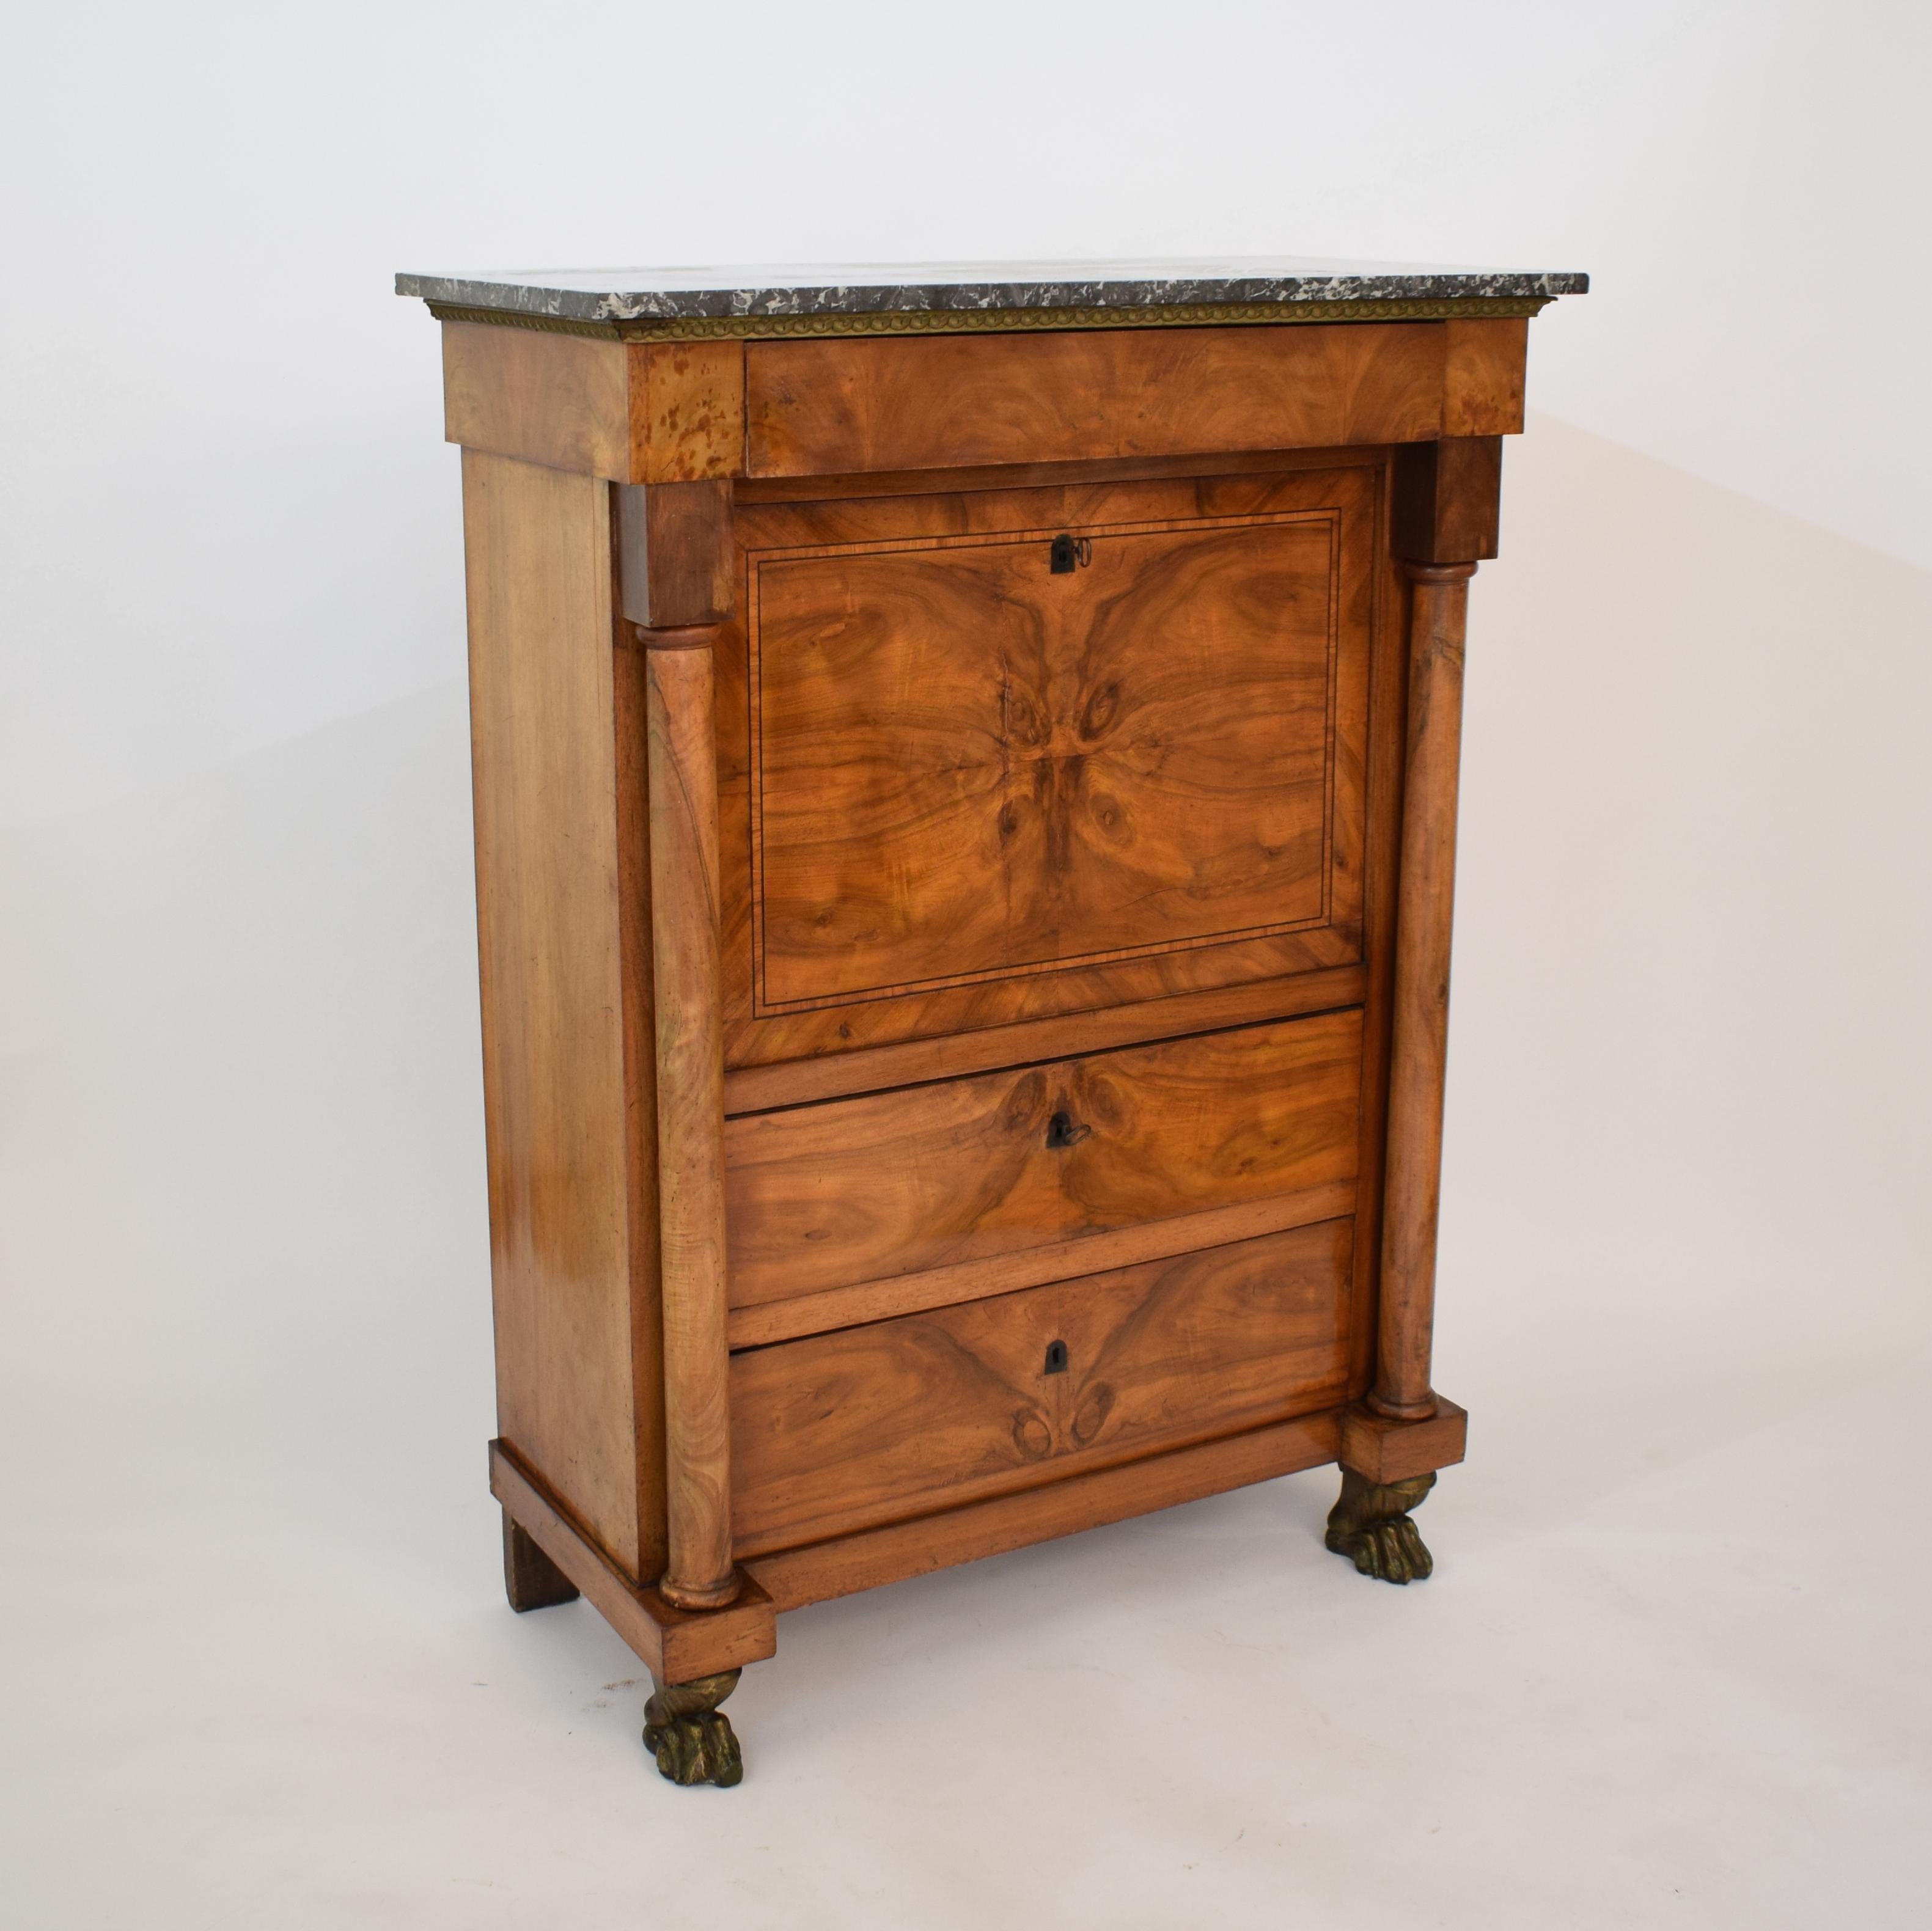 19th Century French Empire Secretaire a Abattant in Brown Walnut with Grey Marble Top, 1810